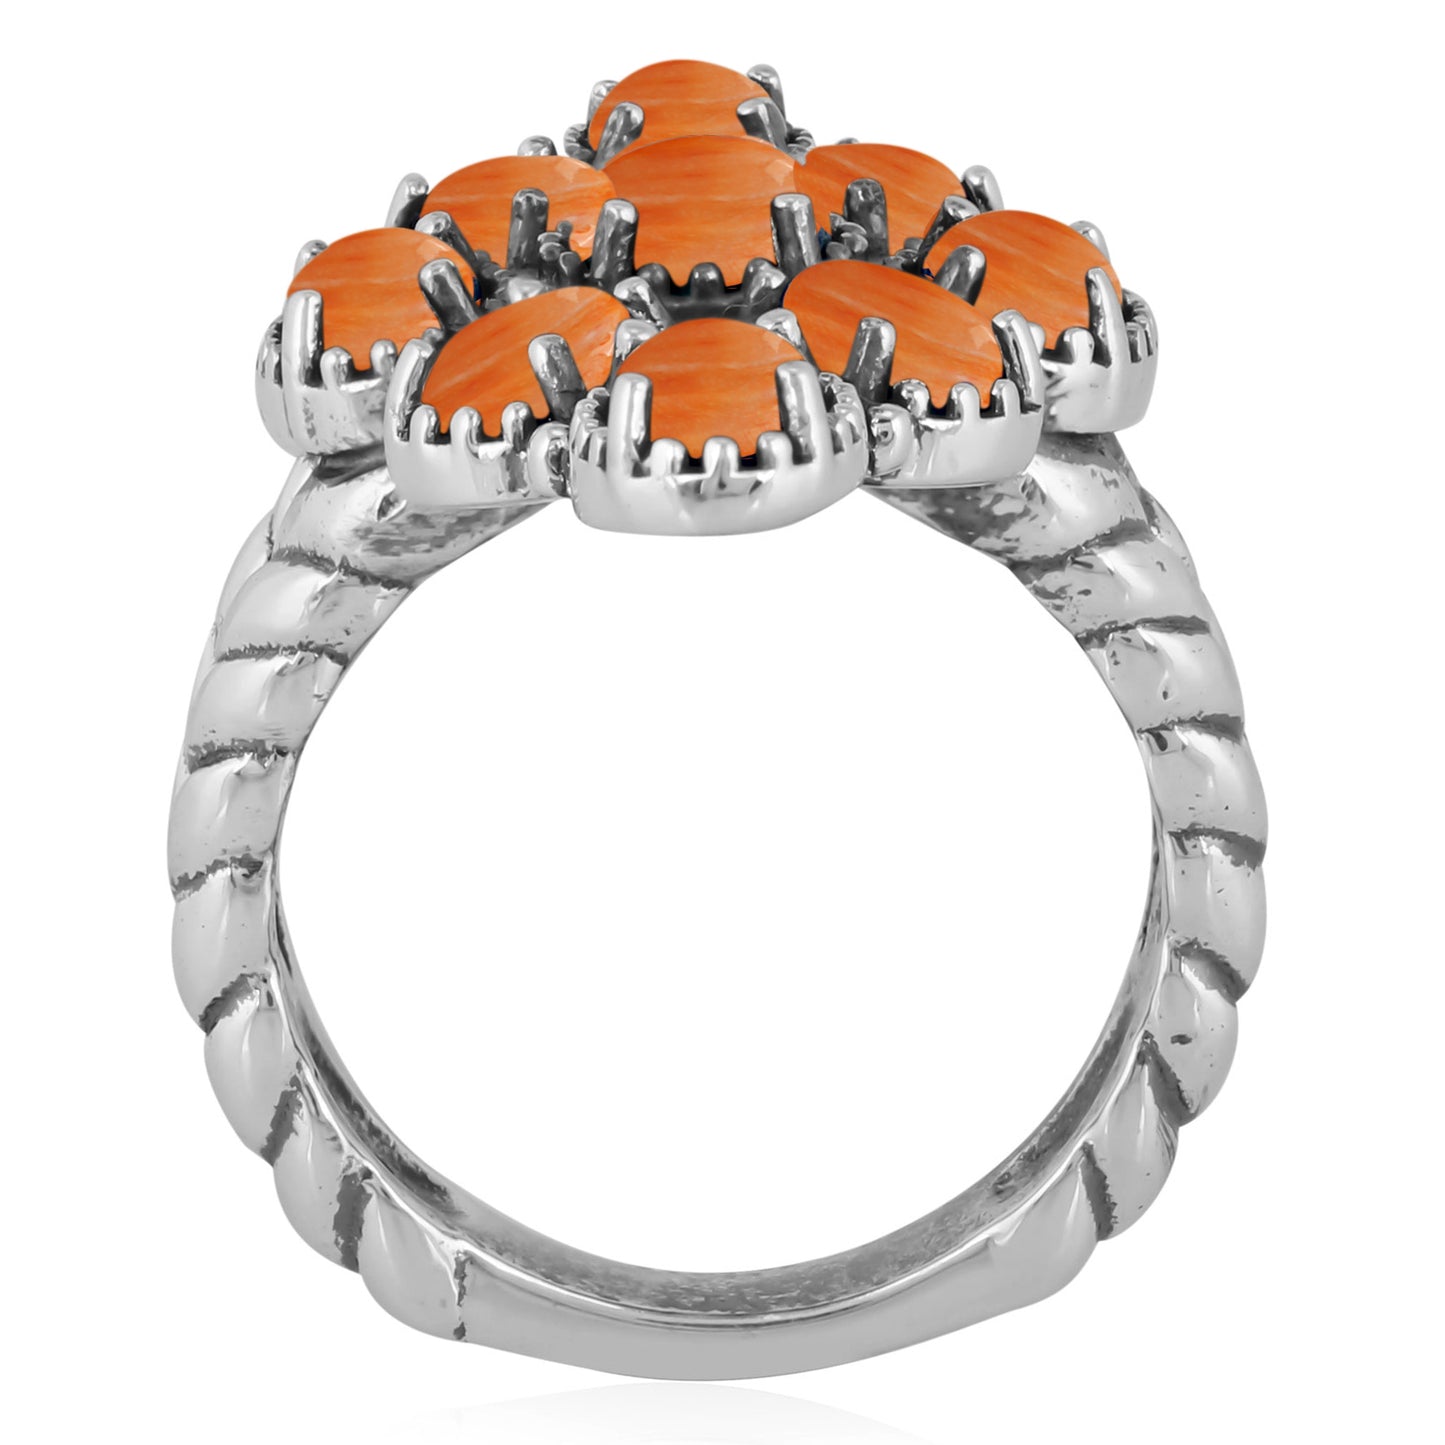 Southwestern Orange Wildflower Cluster Ring- Featuring an Array of Orange Spiny Oyster Gemstones and Sterling Silver Rope Band, Sizes 6 - 11